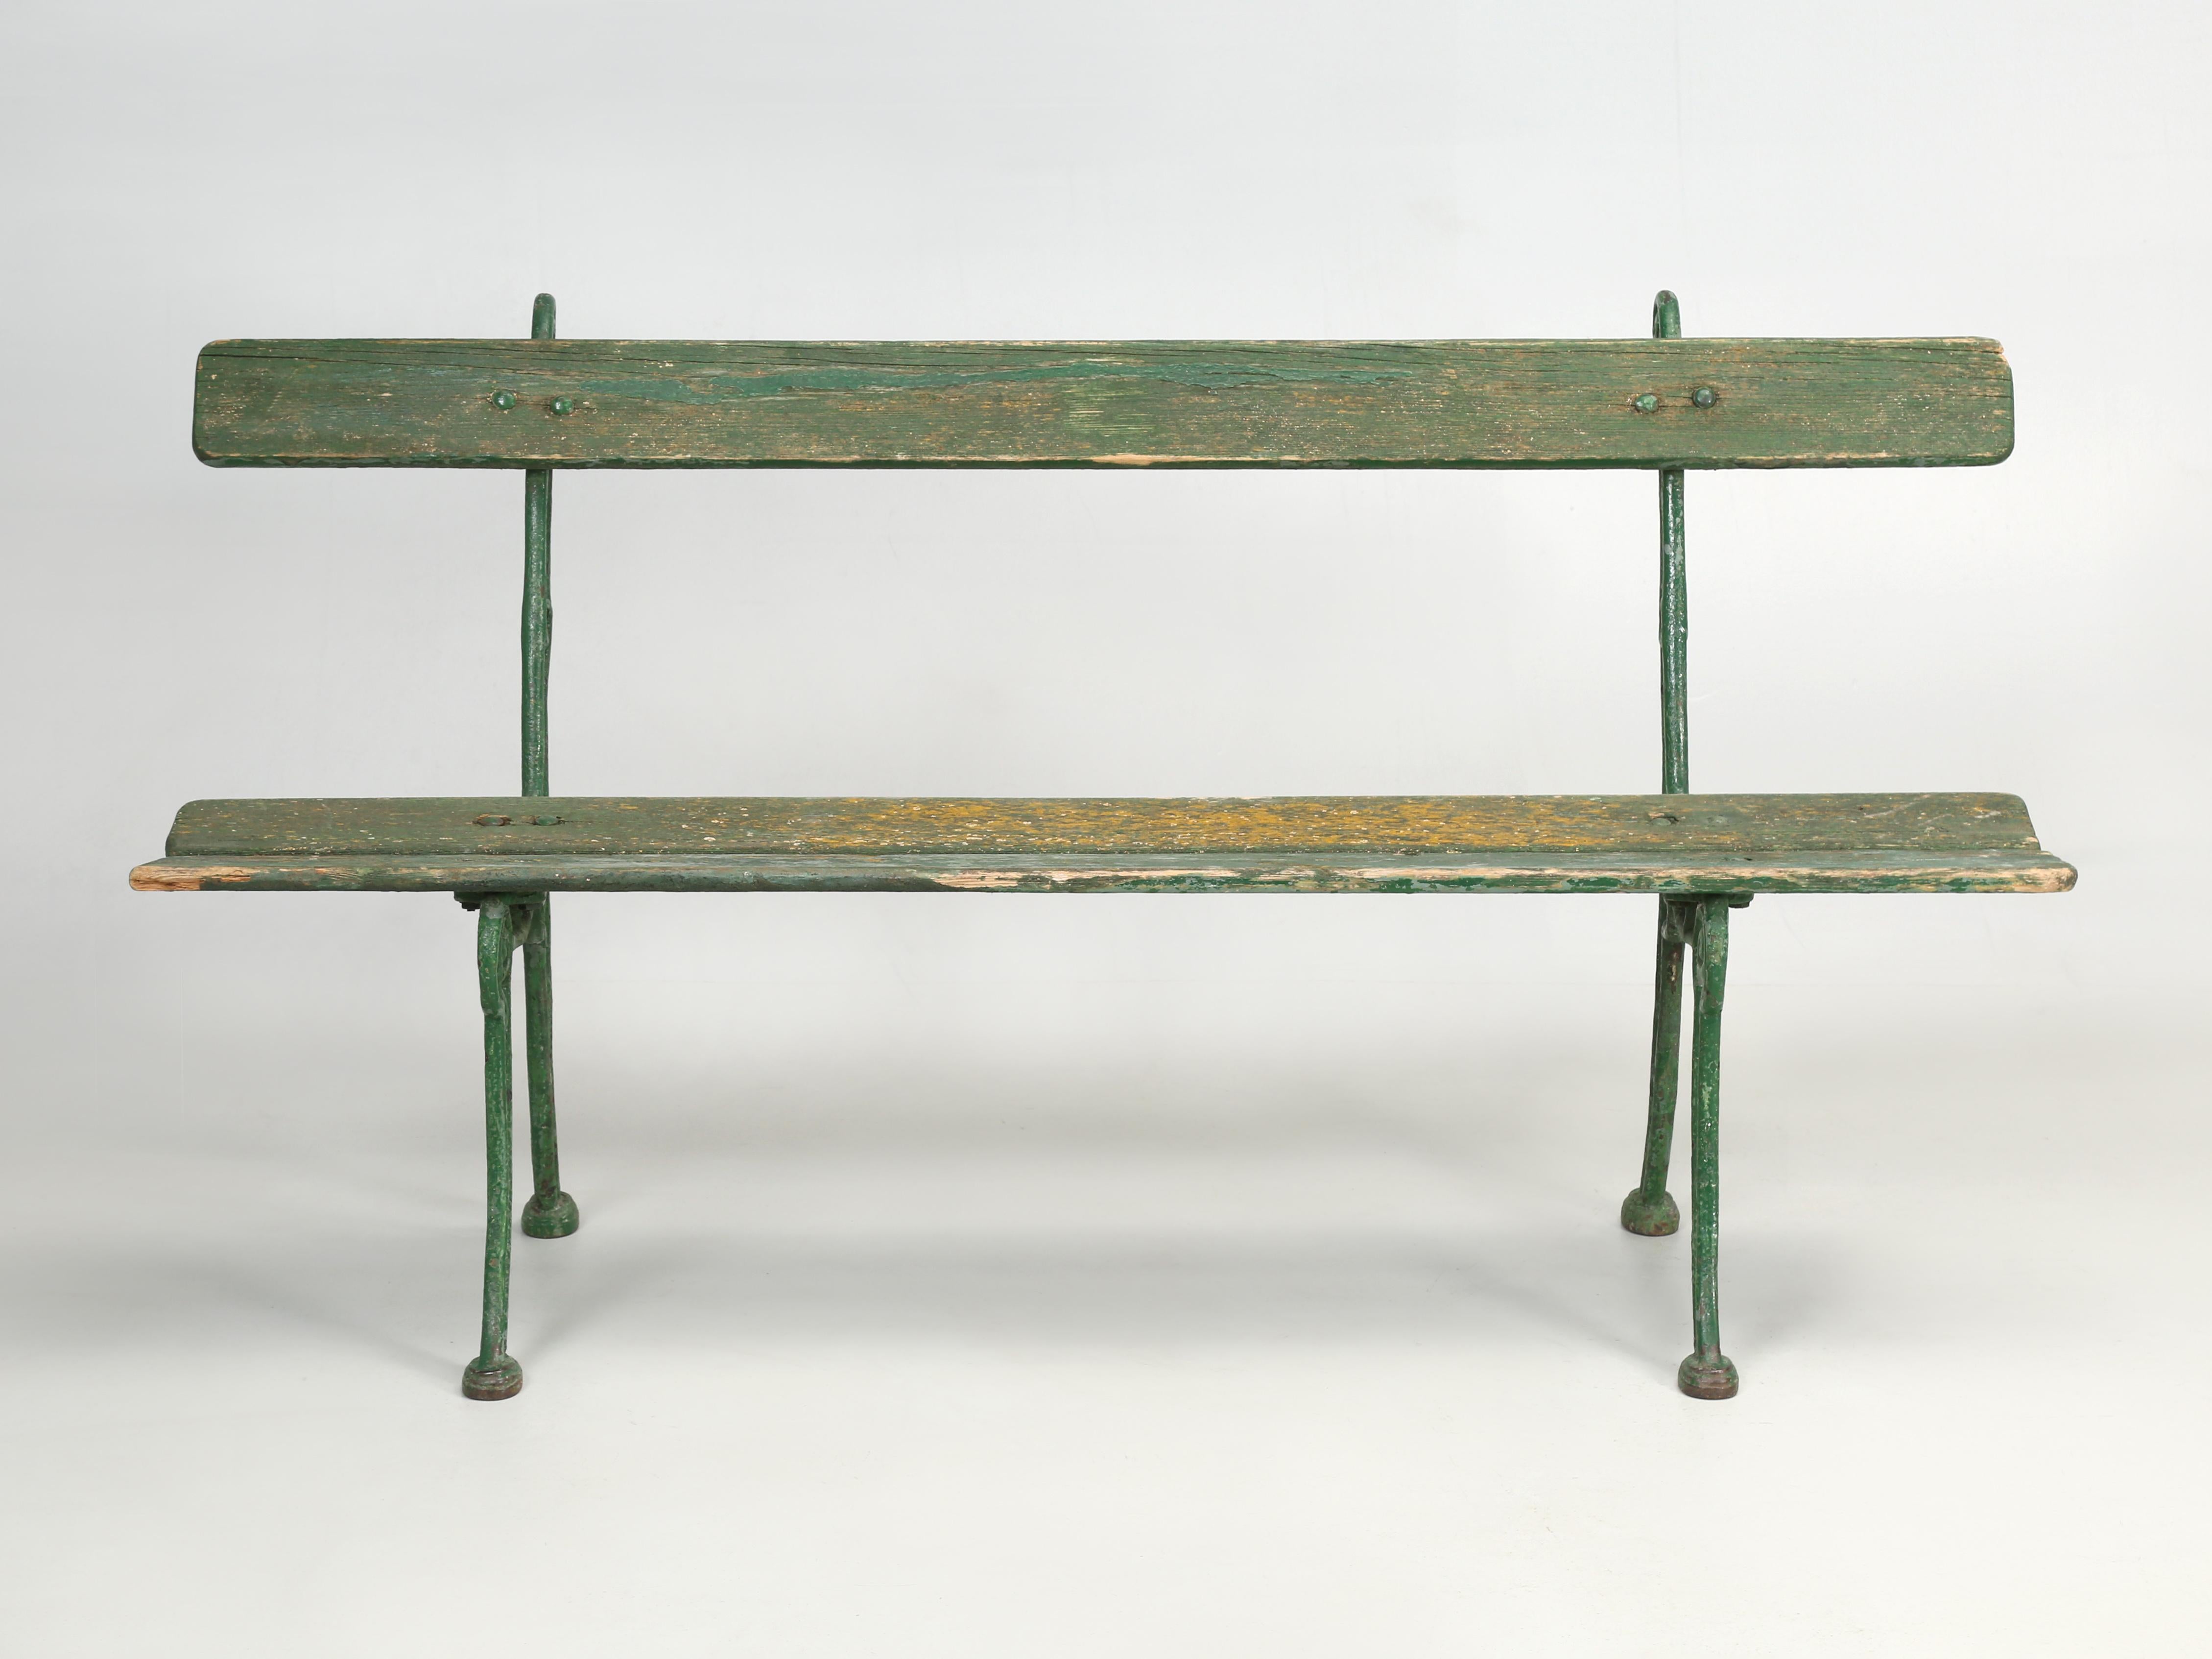 Antique European garden bench in old green paint. The cast iron frame is an unusual design with exceptional details. The paint is perfect for those who appreciate old paint, but rather easy to correct if that's not your taste. 
**Height provided